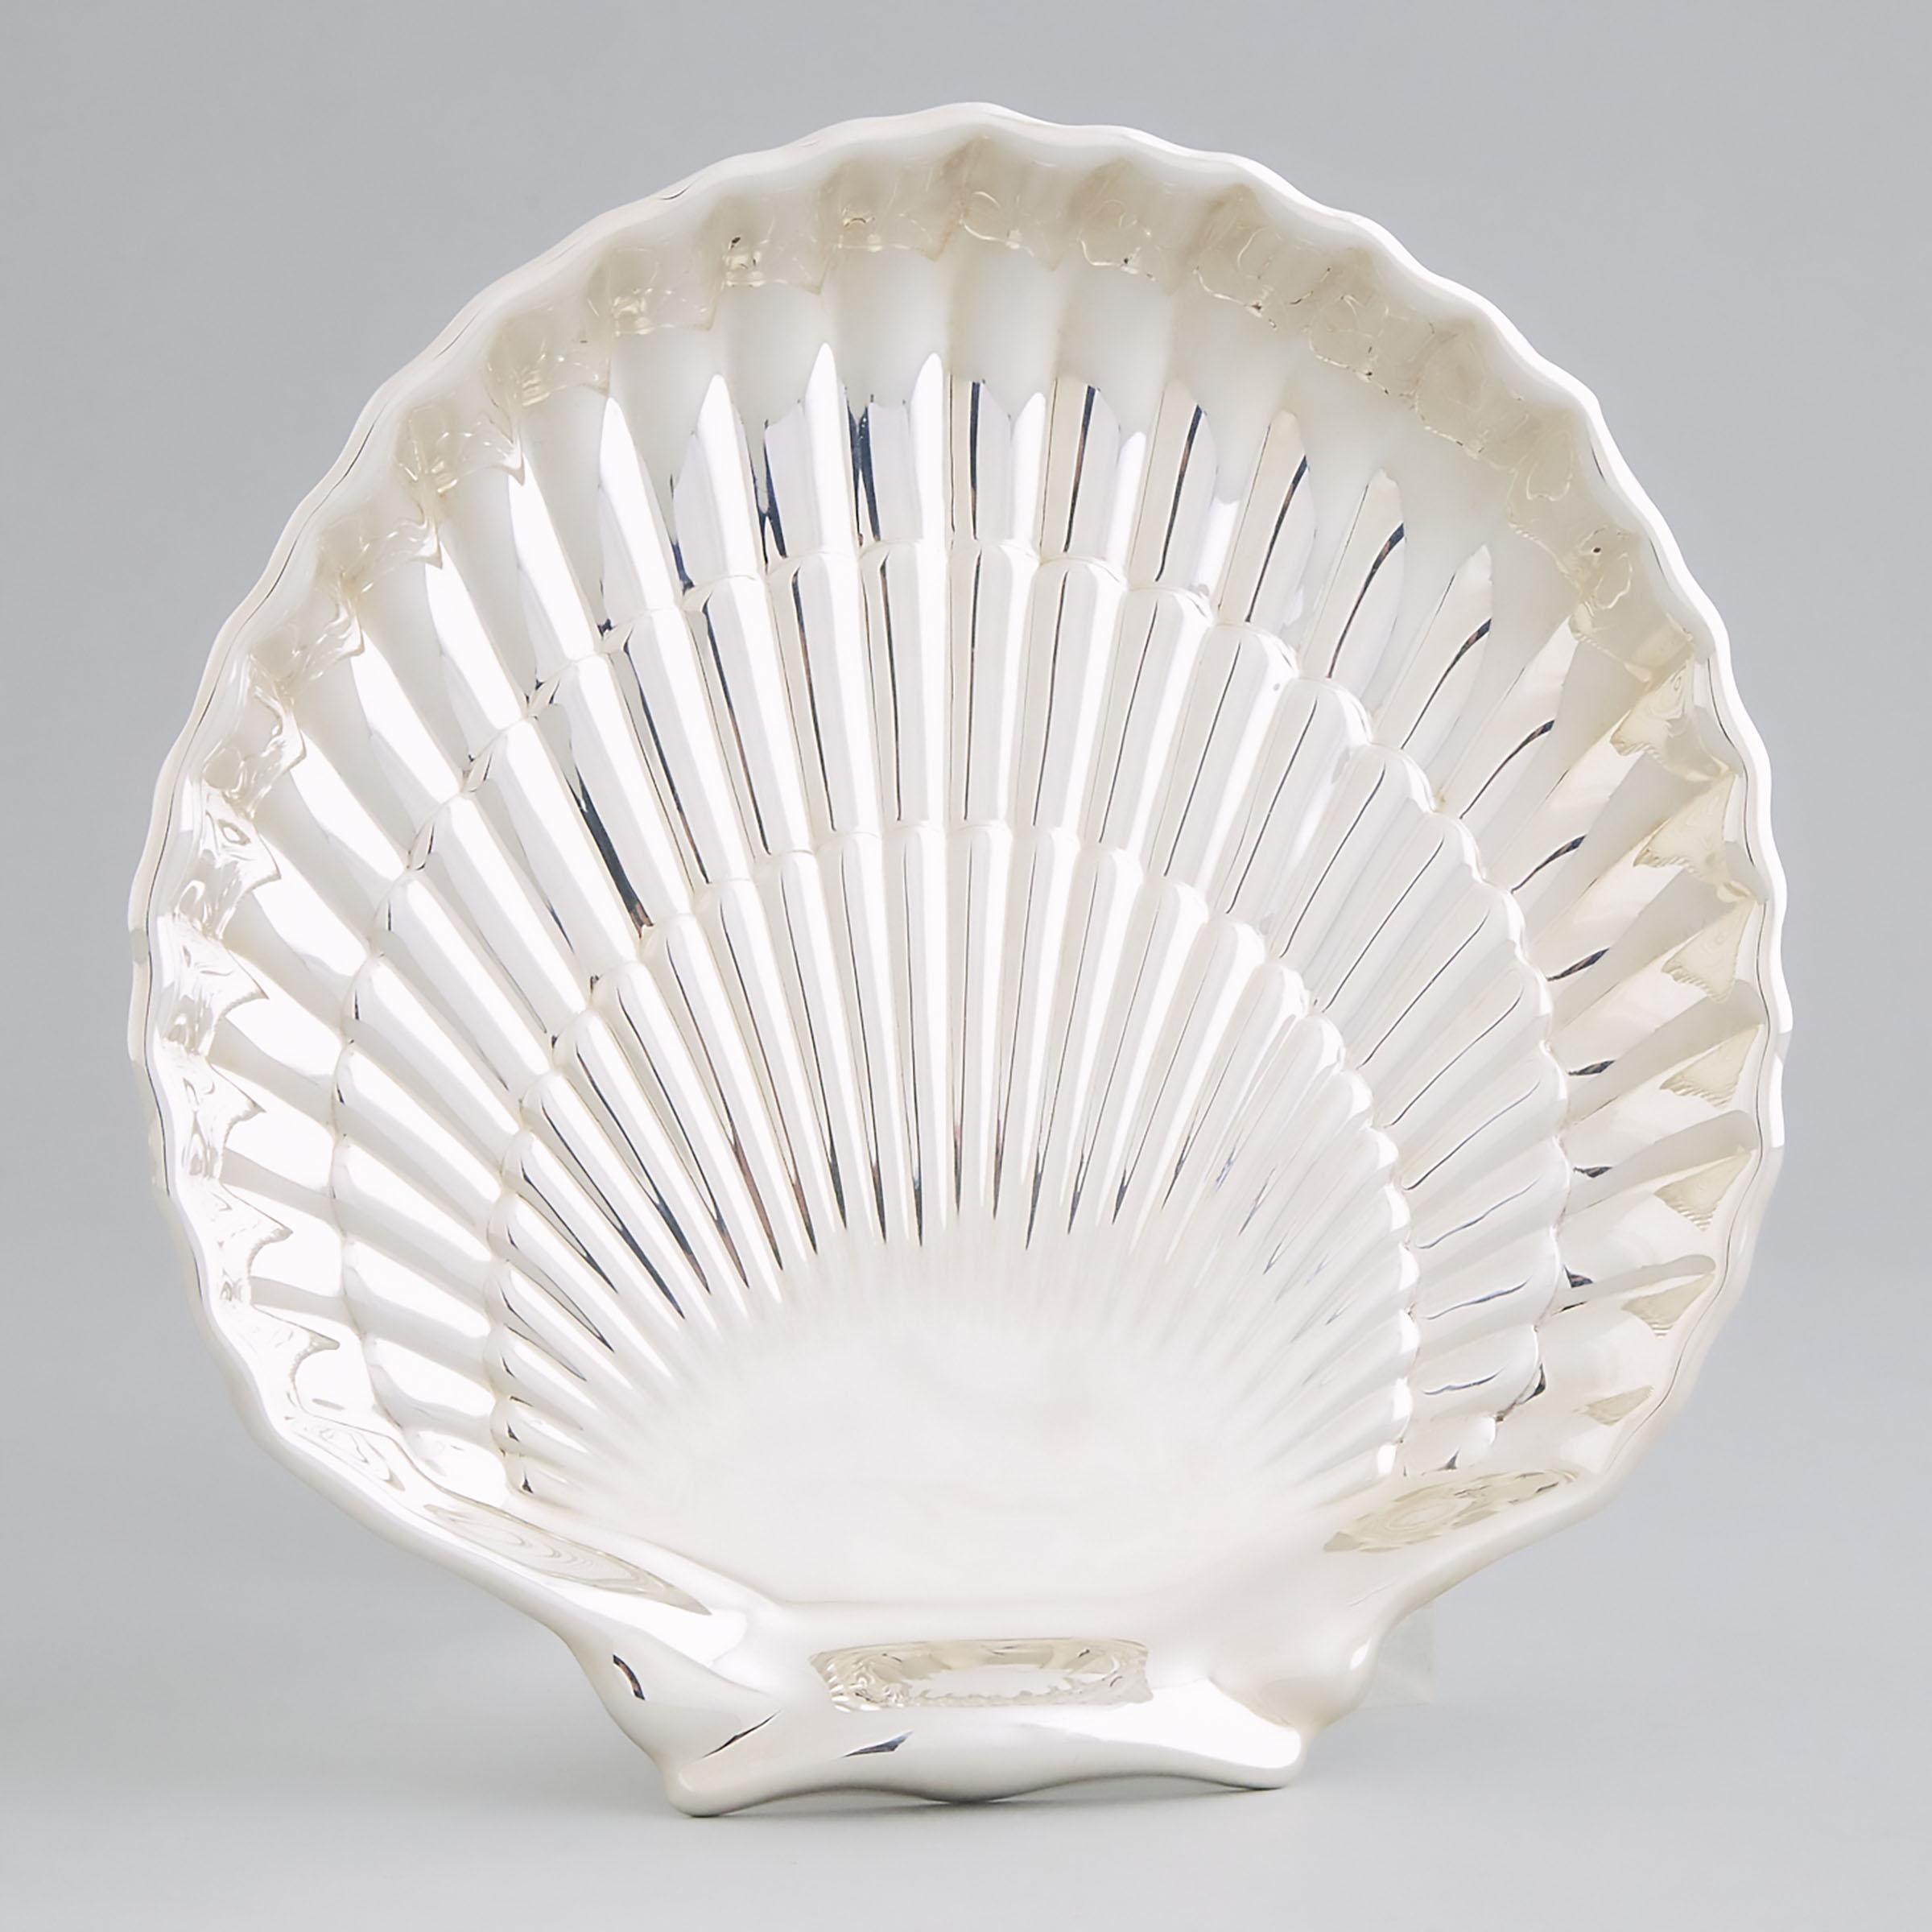 Canadian Silver Shell Shaped Dish, Henry Birks & Sons, Montreal, Que., 1962